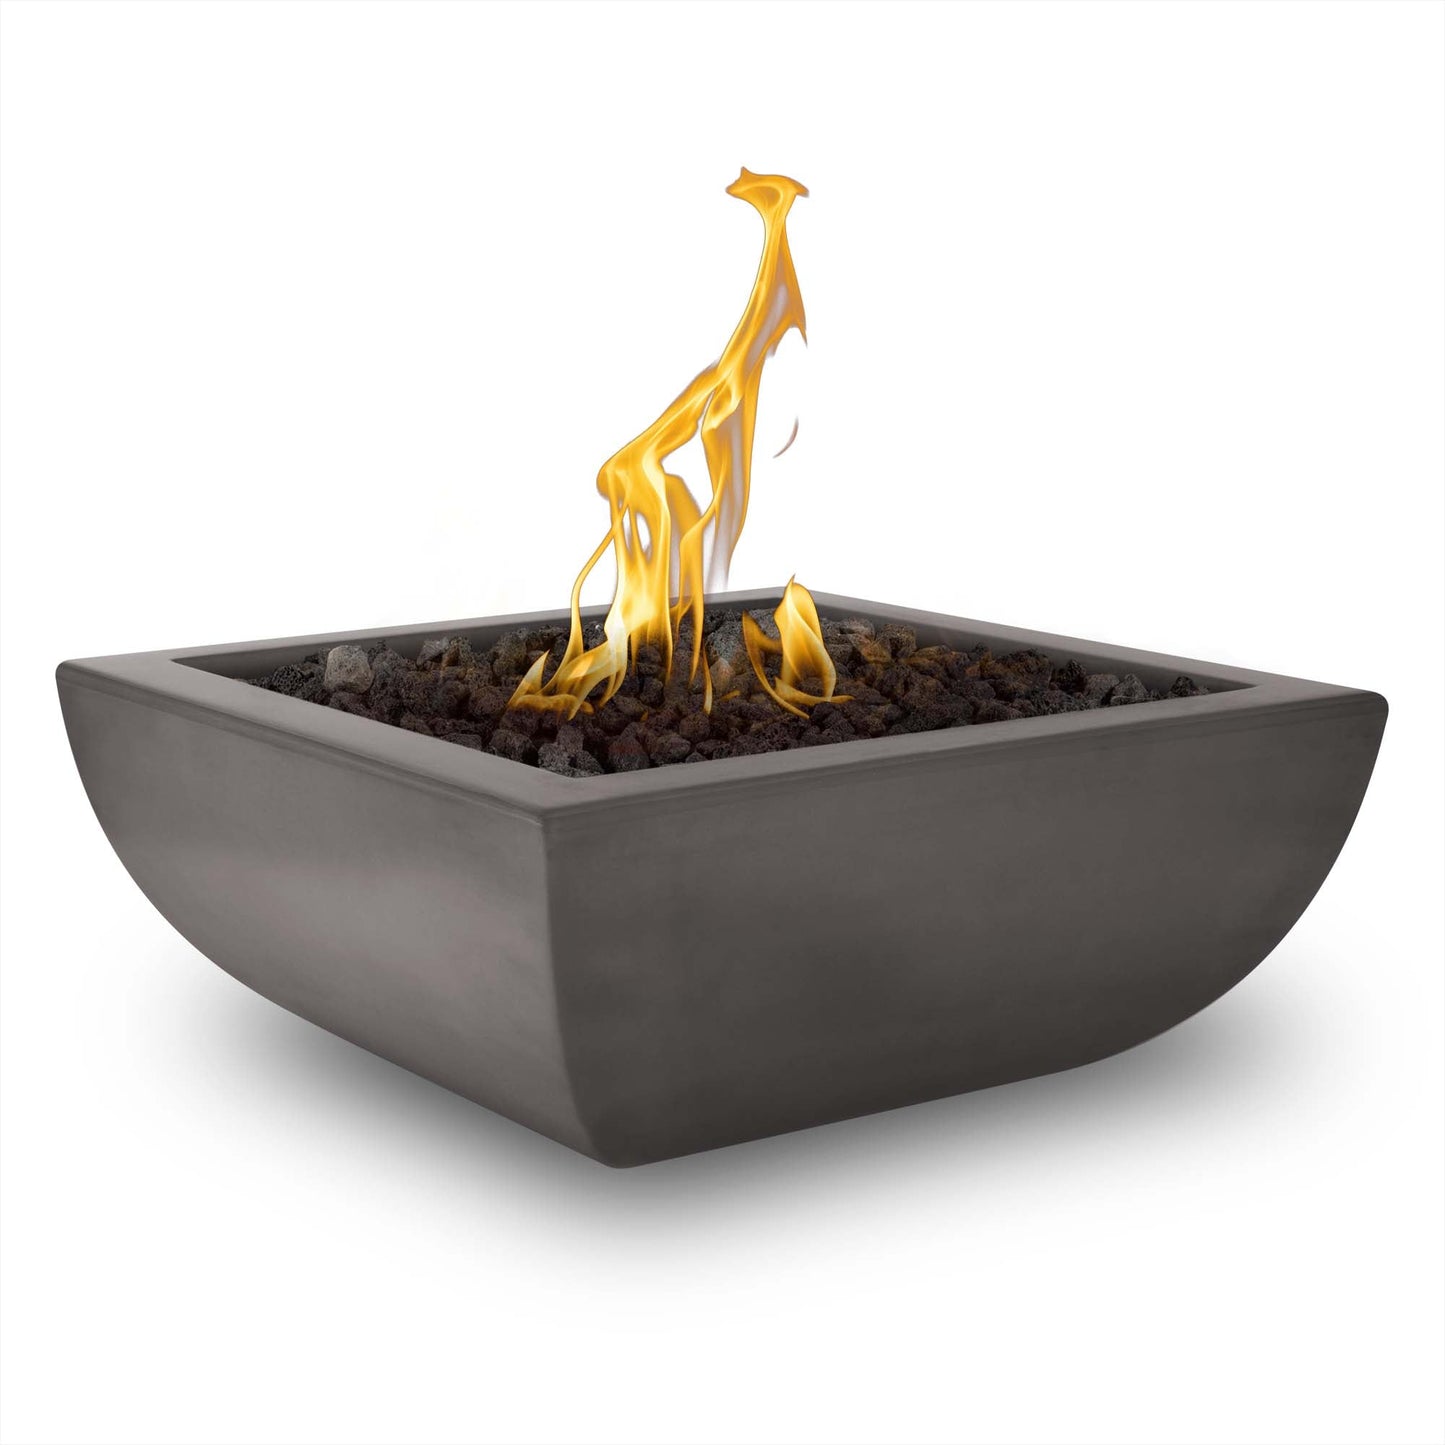 The Outdoor Plus Square Avalon 36" White GFRC Concrete Liquid Propane Fire Bowl with Match Lit with Flame Sense Ignition